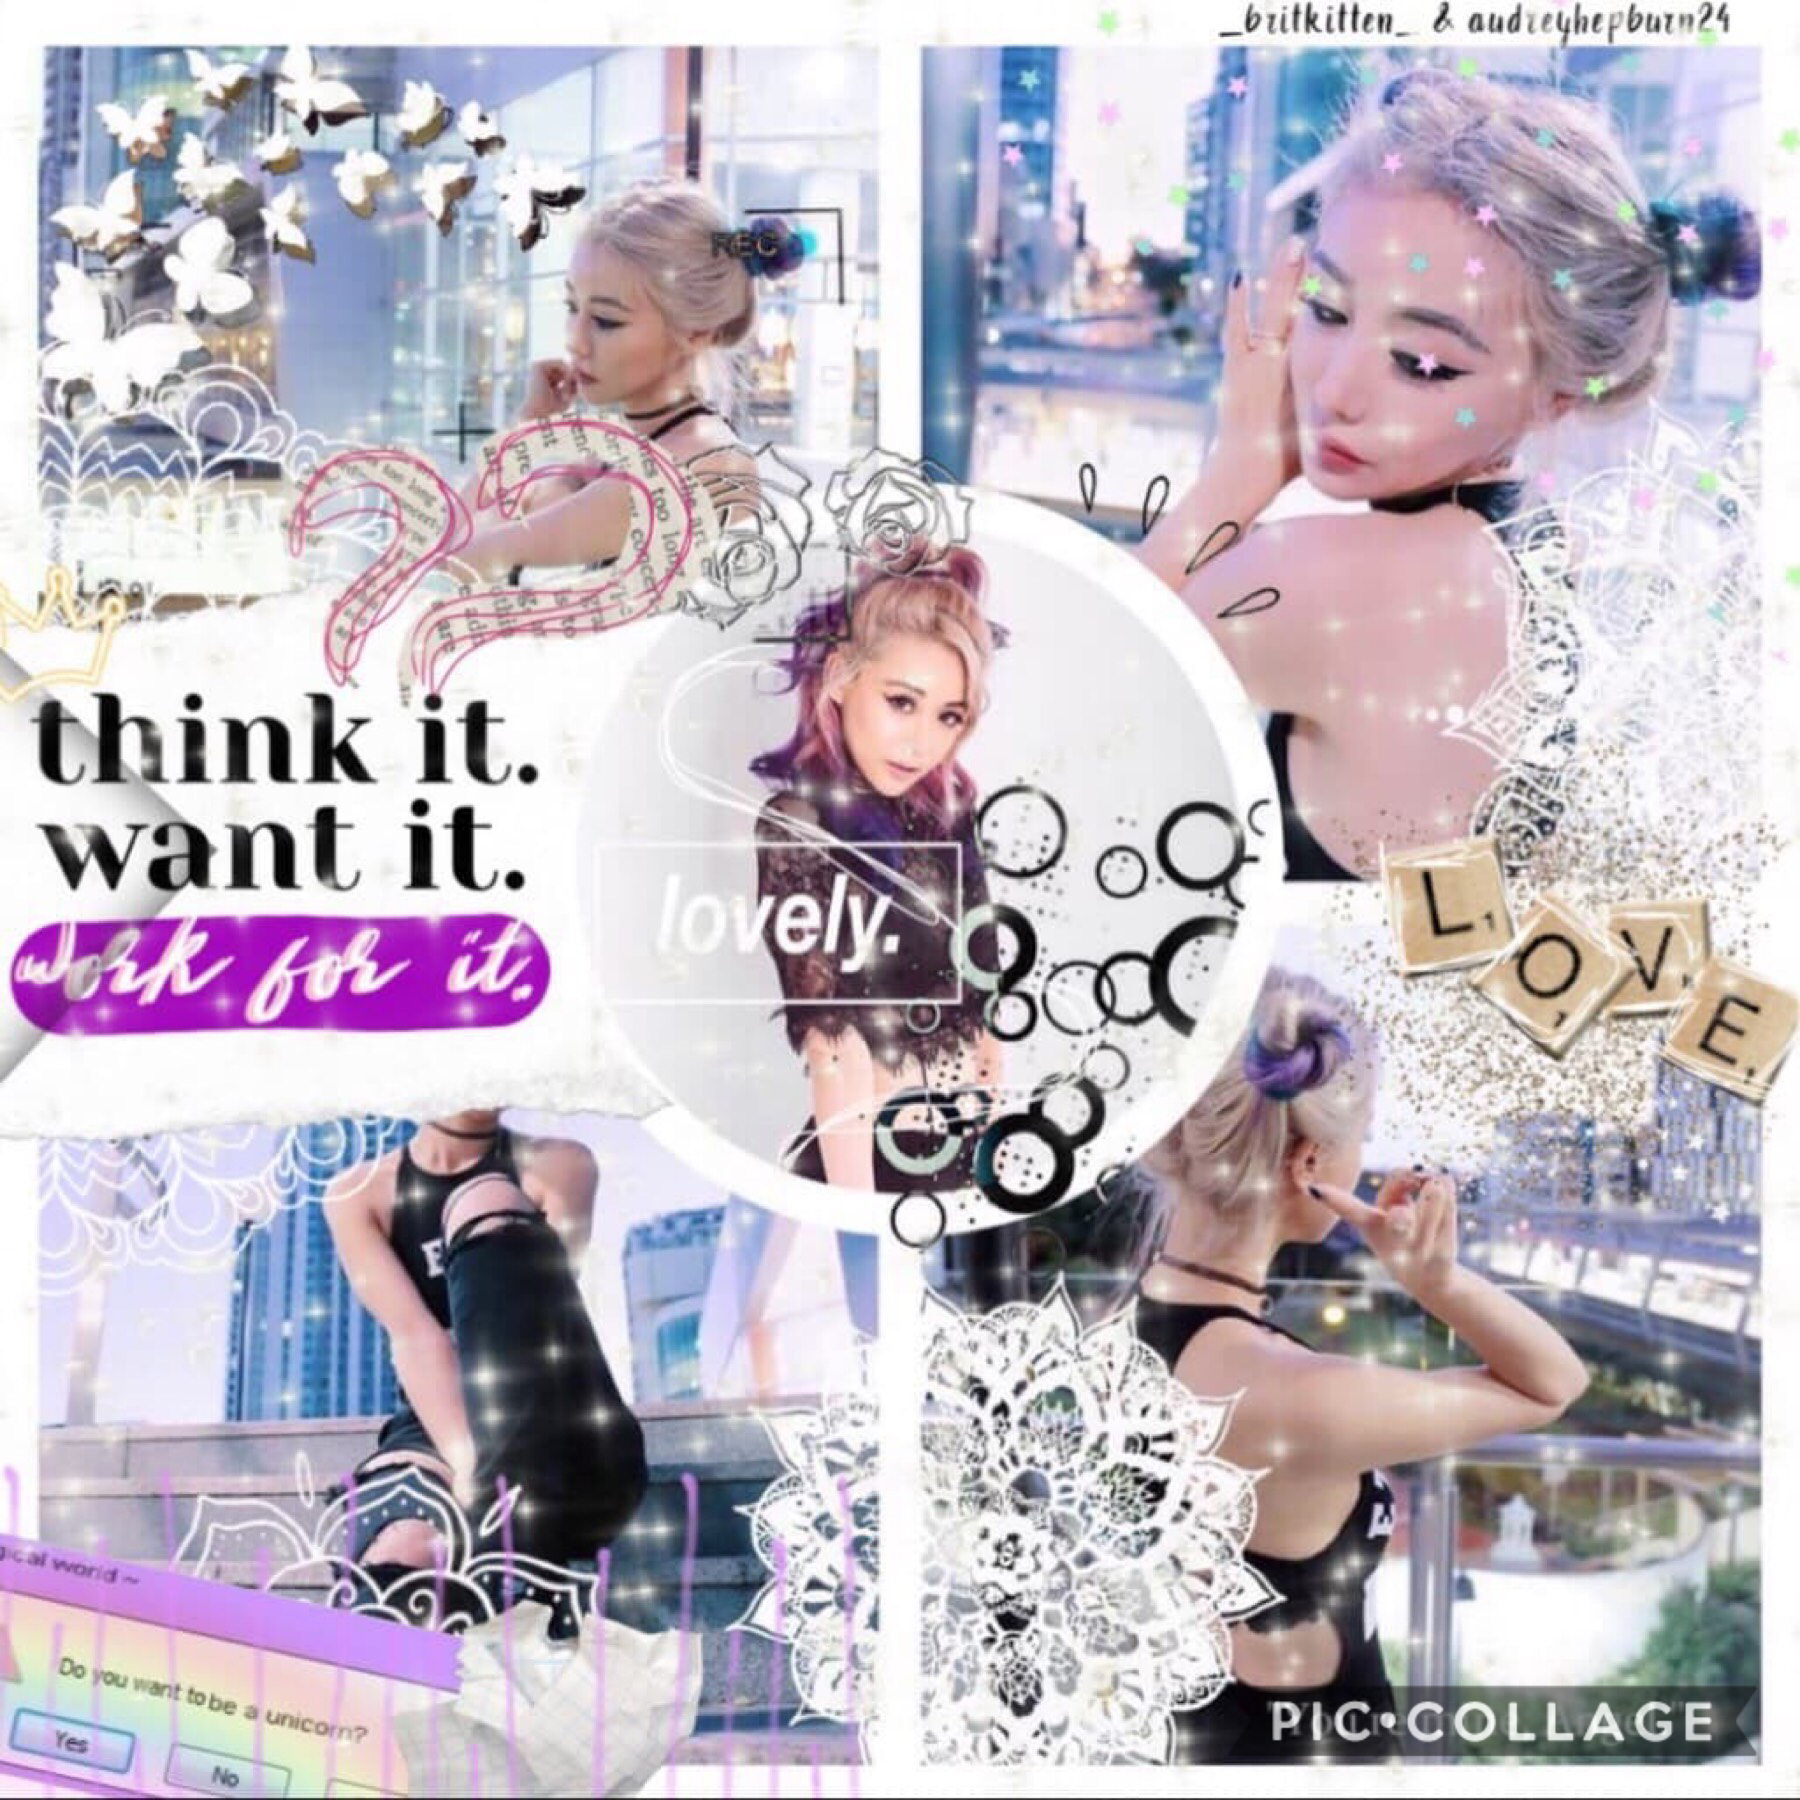 Tap kittens 😽😽
Collab with the beautiful Stella 💖 @Audreyhepburn24 !! 💜🎀🥰 follow her b/c her edits are goals 